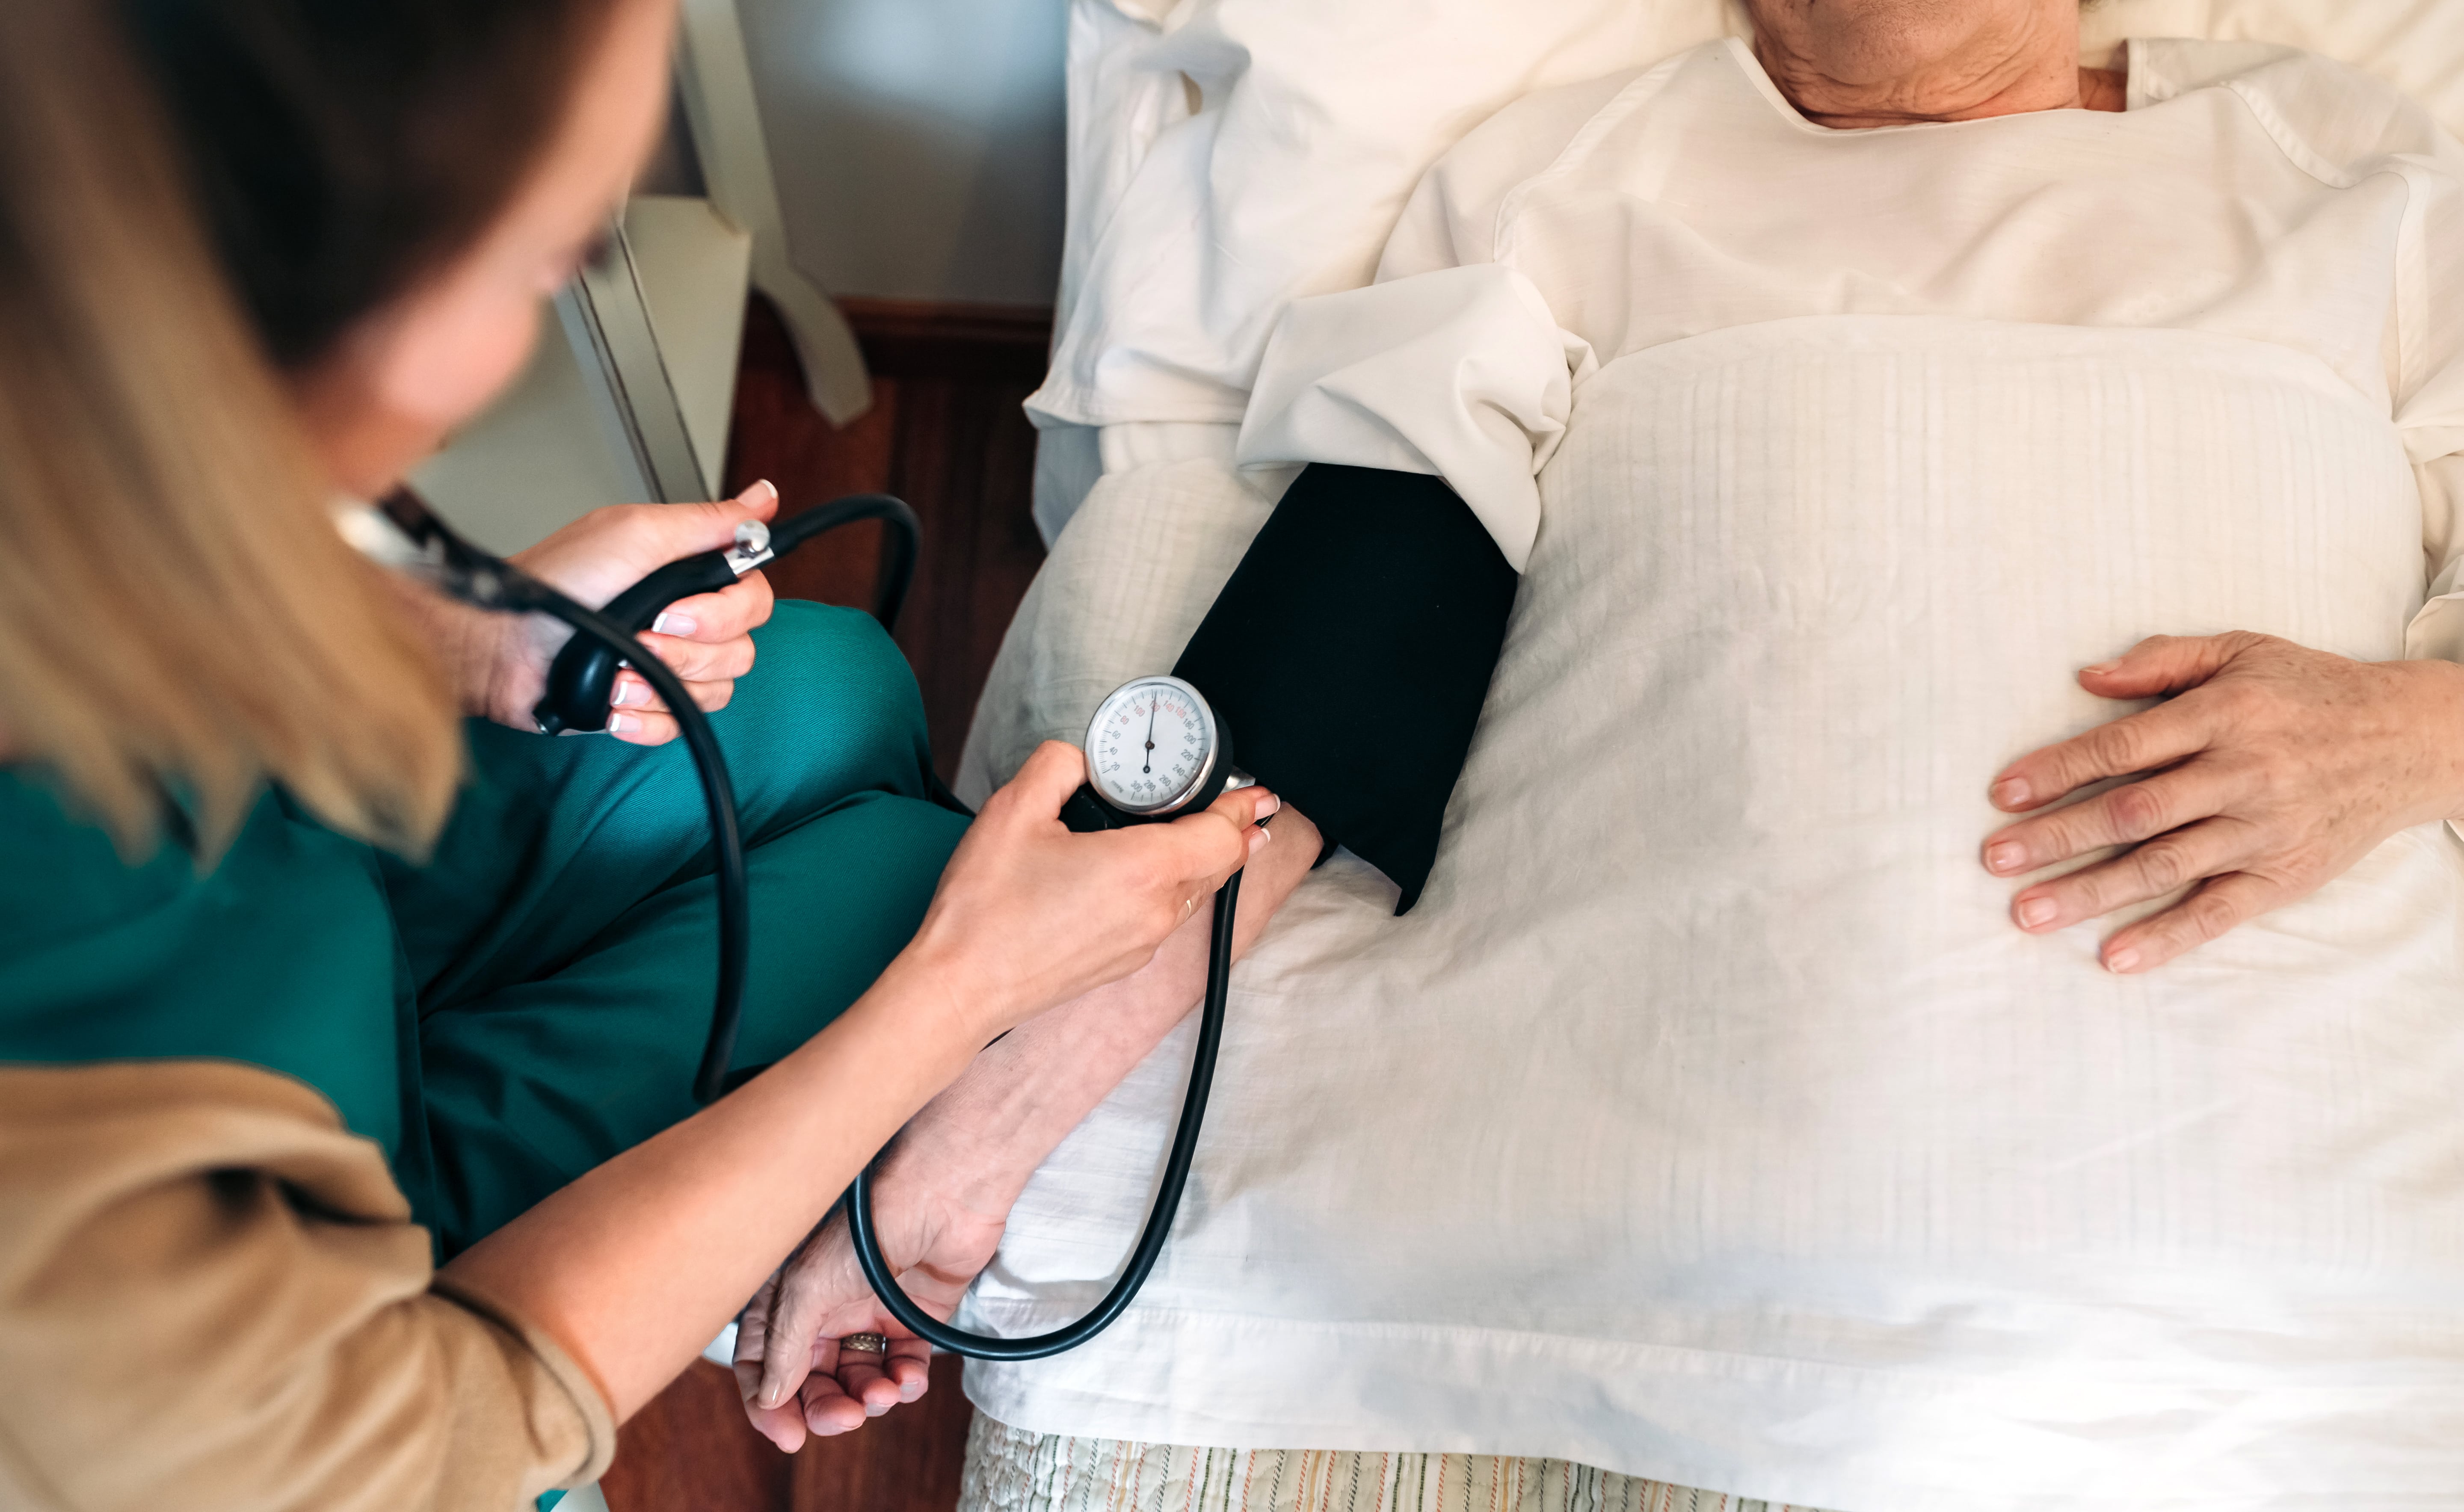 The Dangers of High Blood Pressure